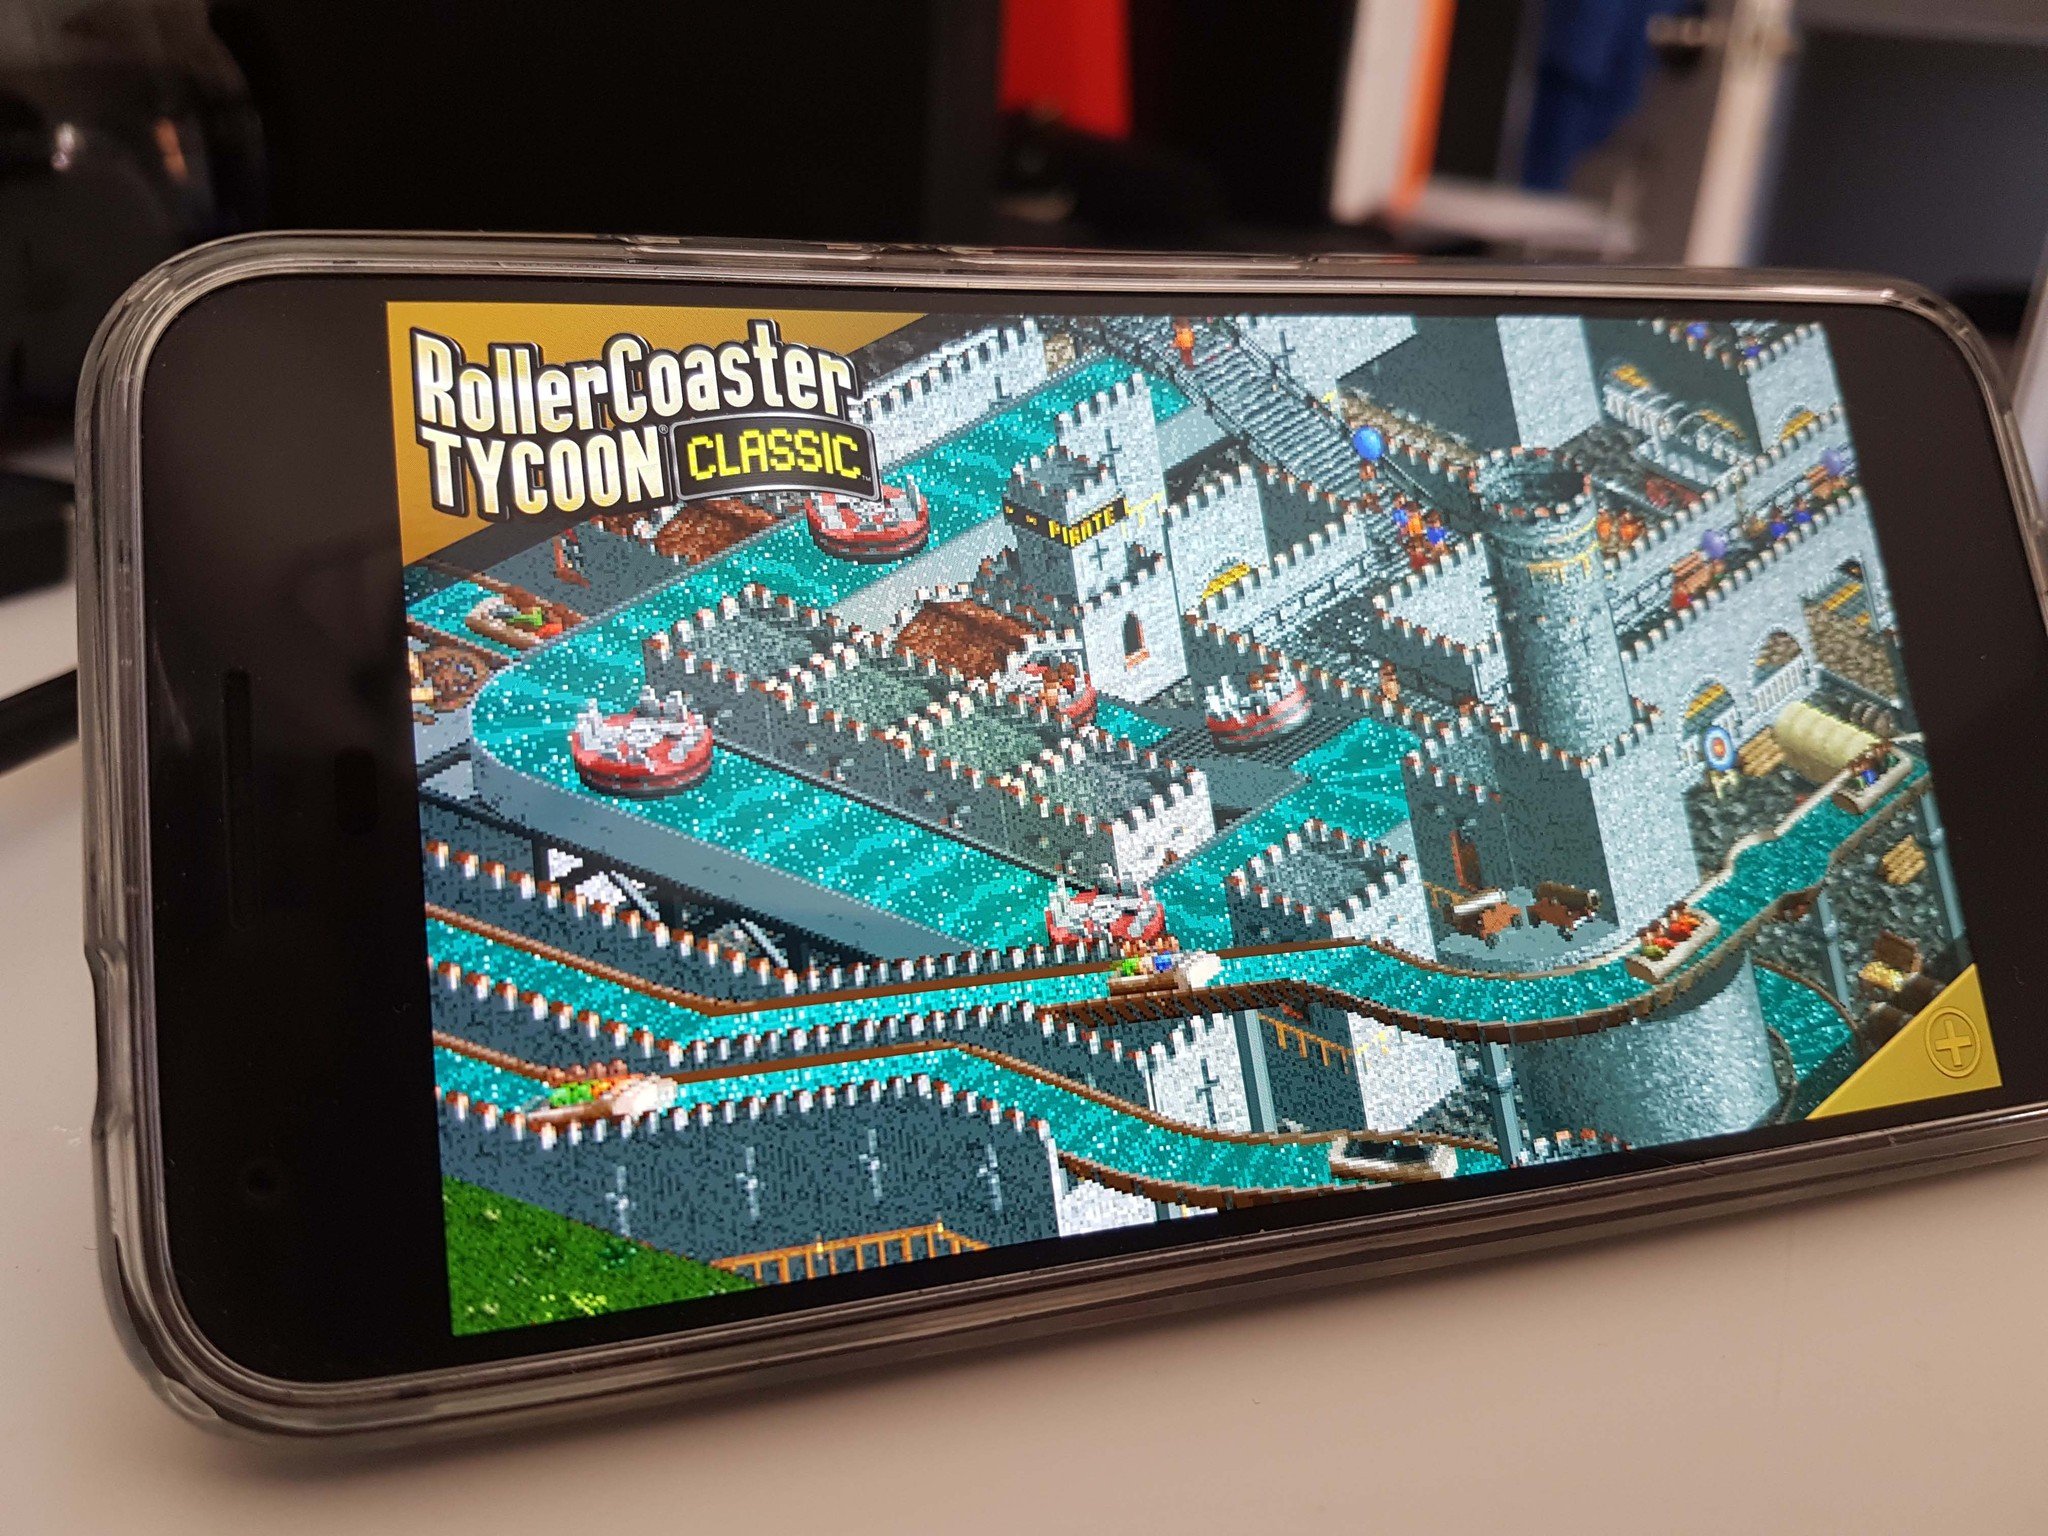 RollerCoaster Tycoon Classic review: A near-perfect adaptation | Android Central1600 x 1200